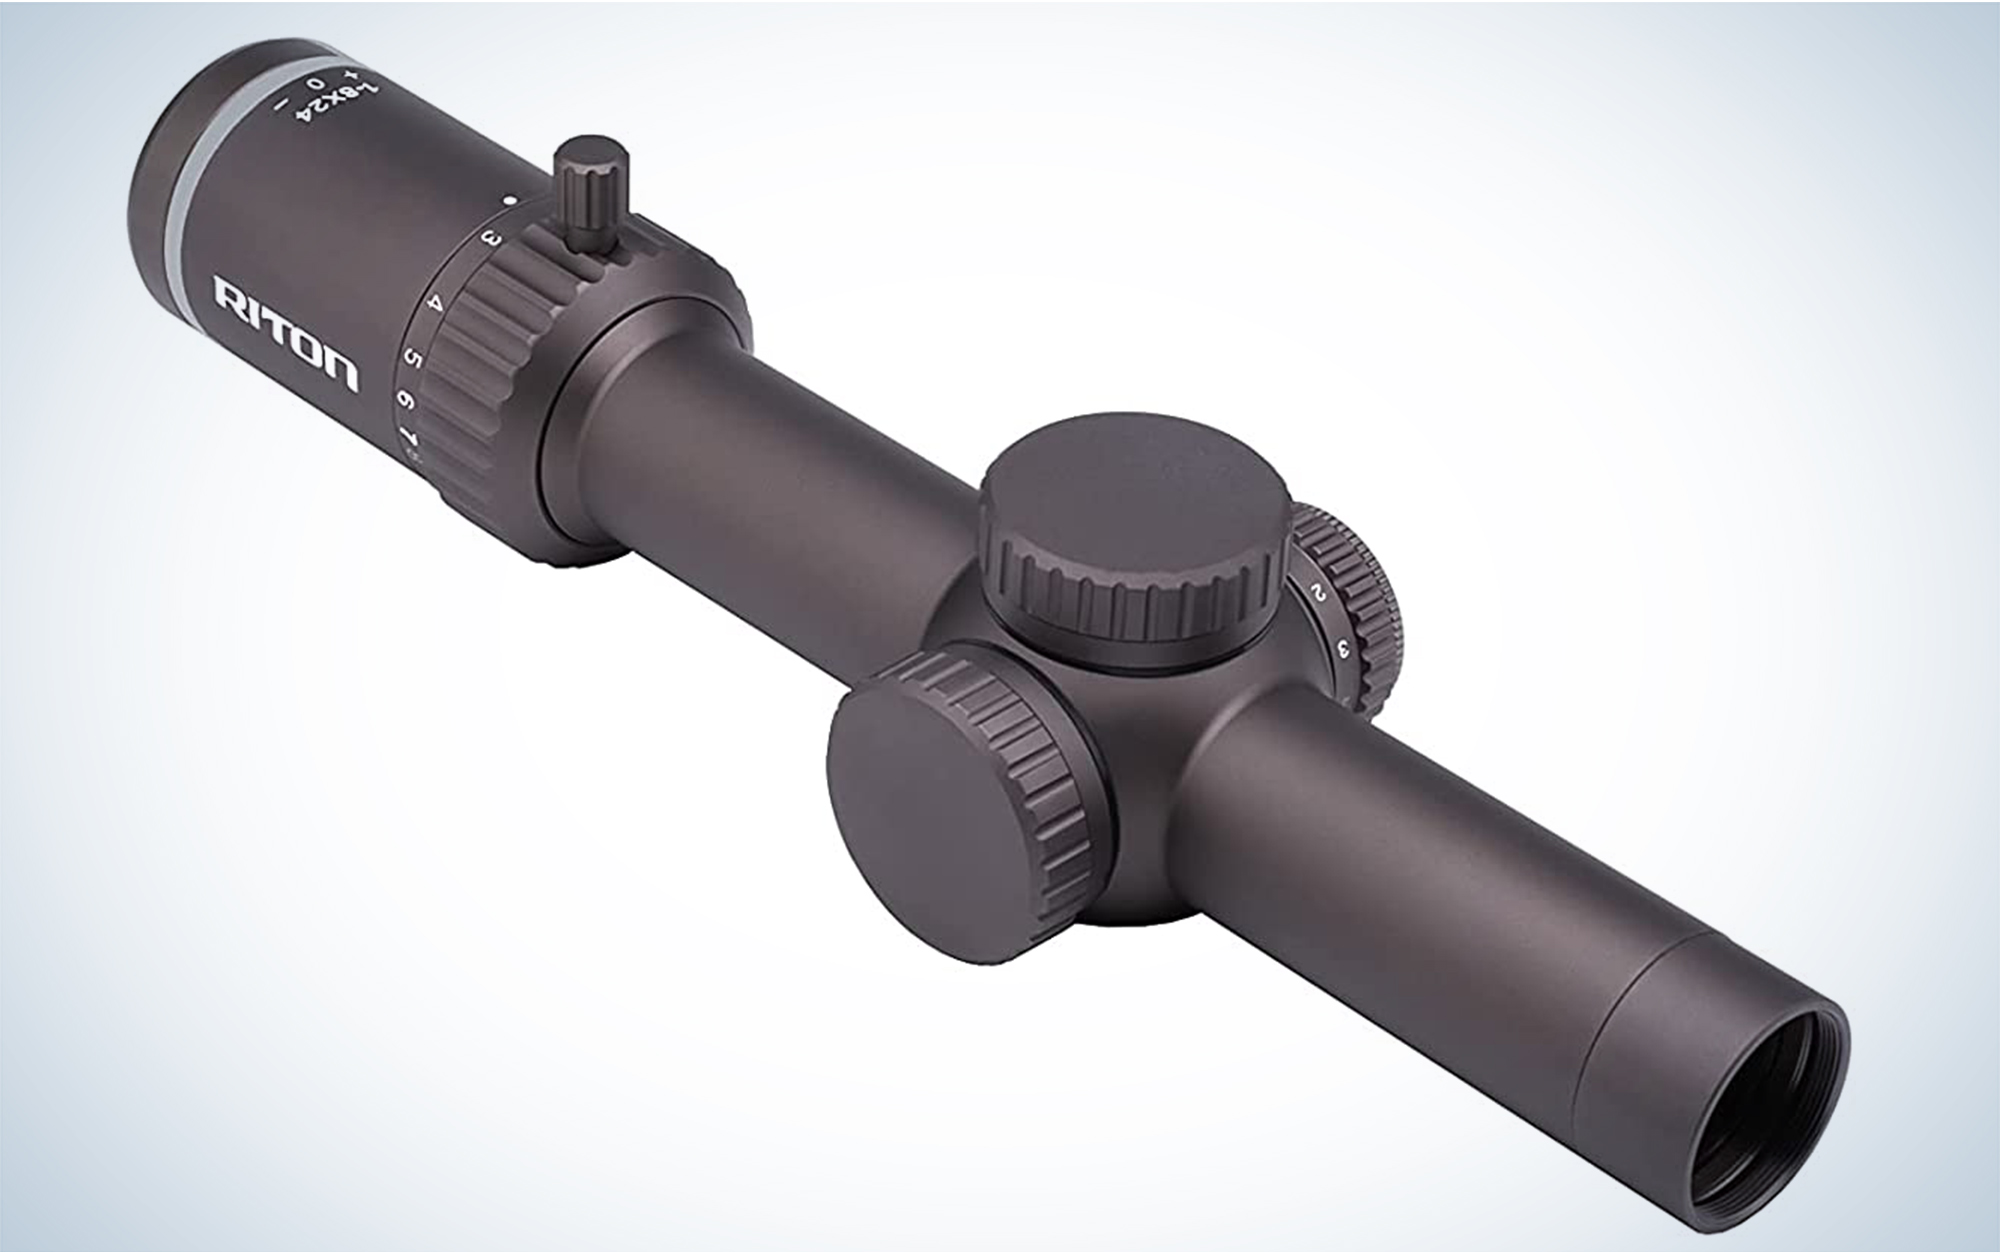 The Riton 3 Tactix 1-8x24 is the best lpvo under $300.